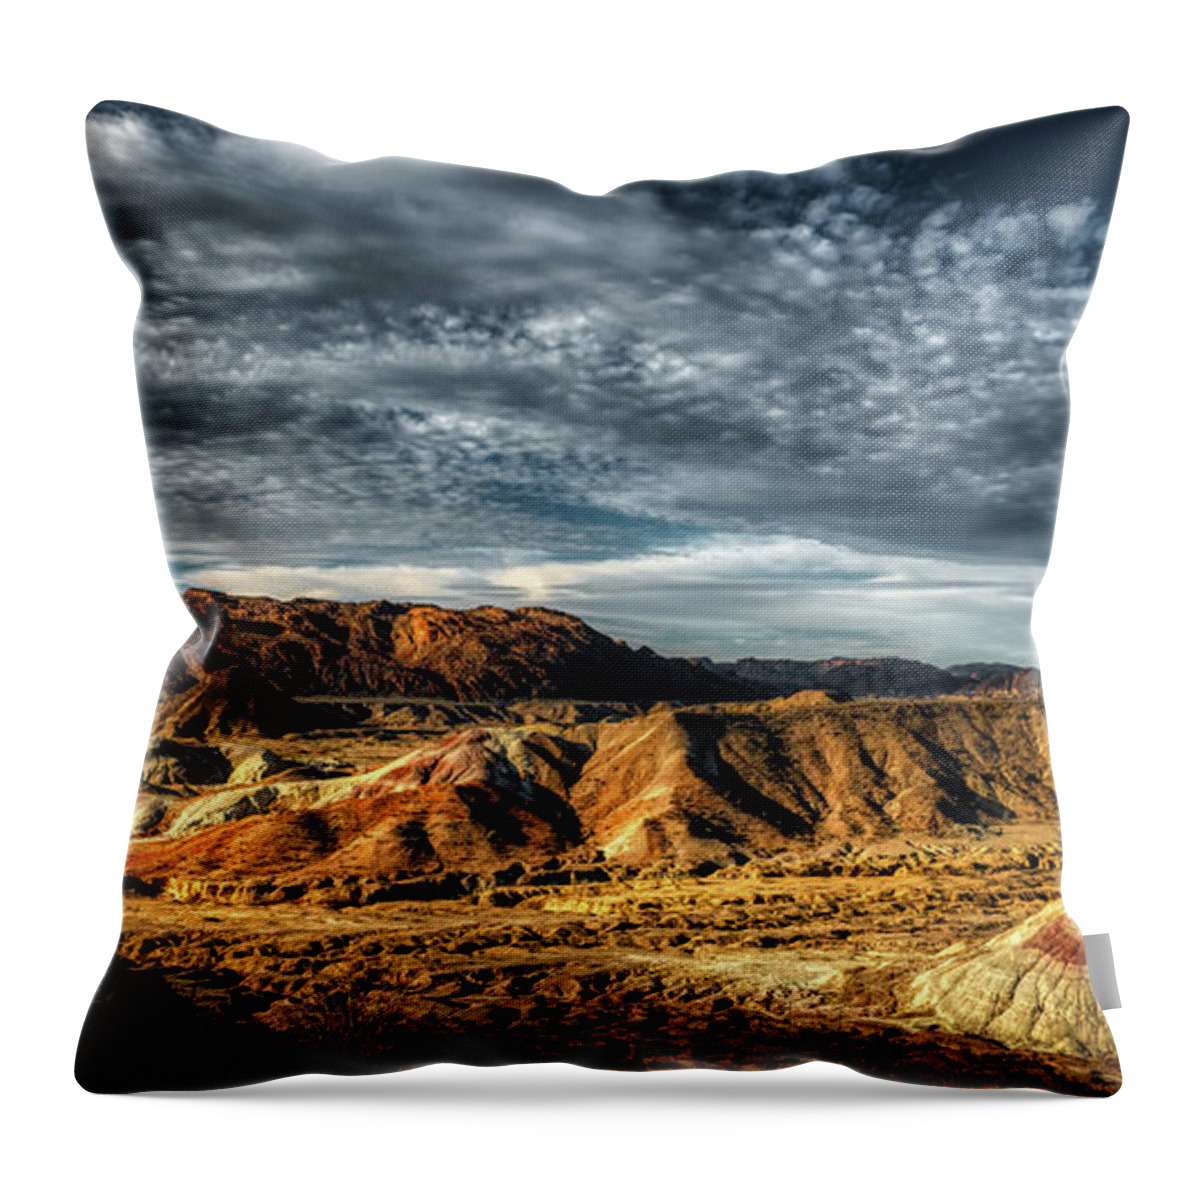 Big Bend National Park Throw Pillow featuring the photograph Big Bend Nationa Park - Texas by Mountain Dreams